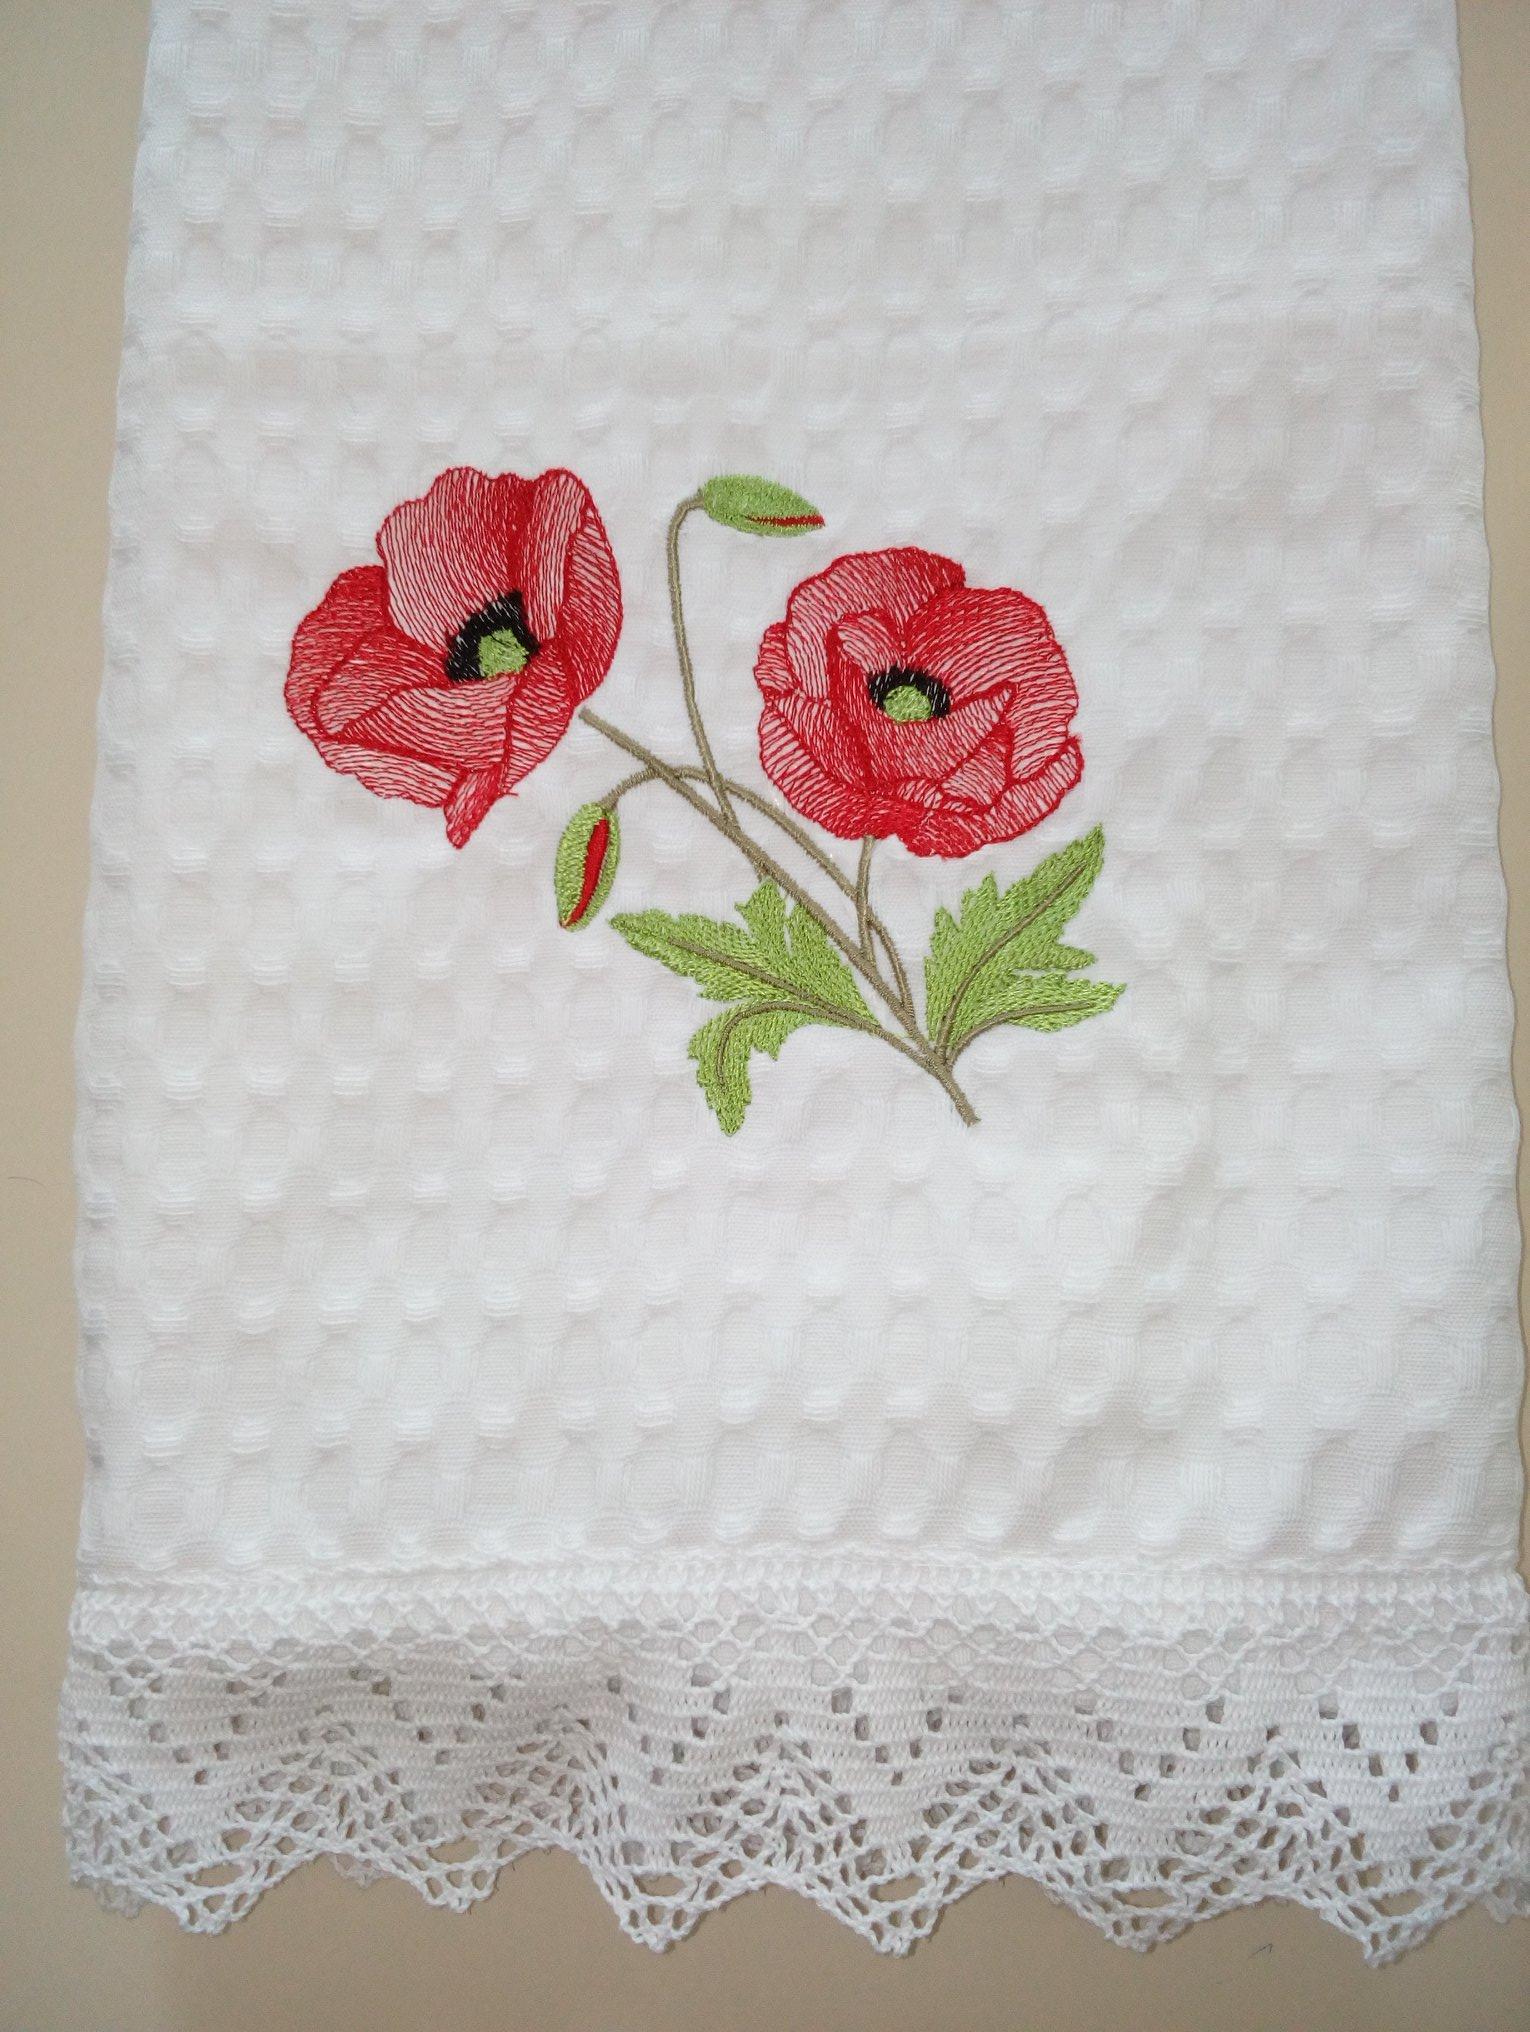 Embroidered home decoration with poppies design